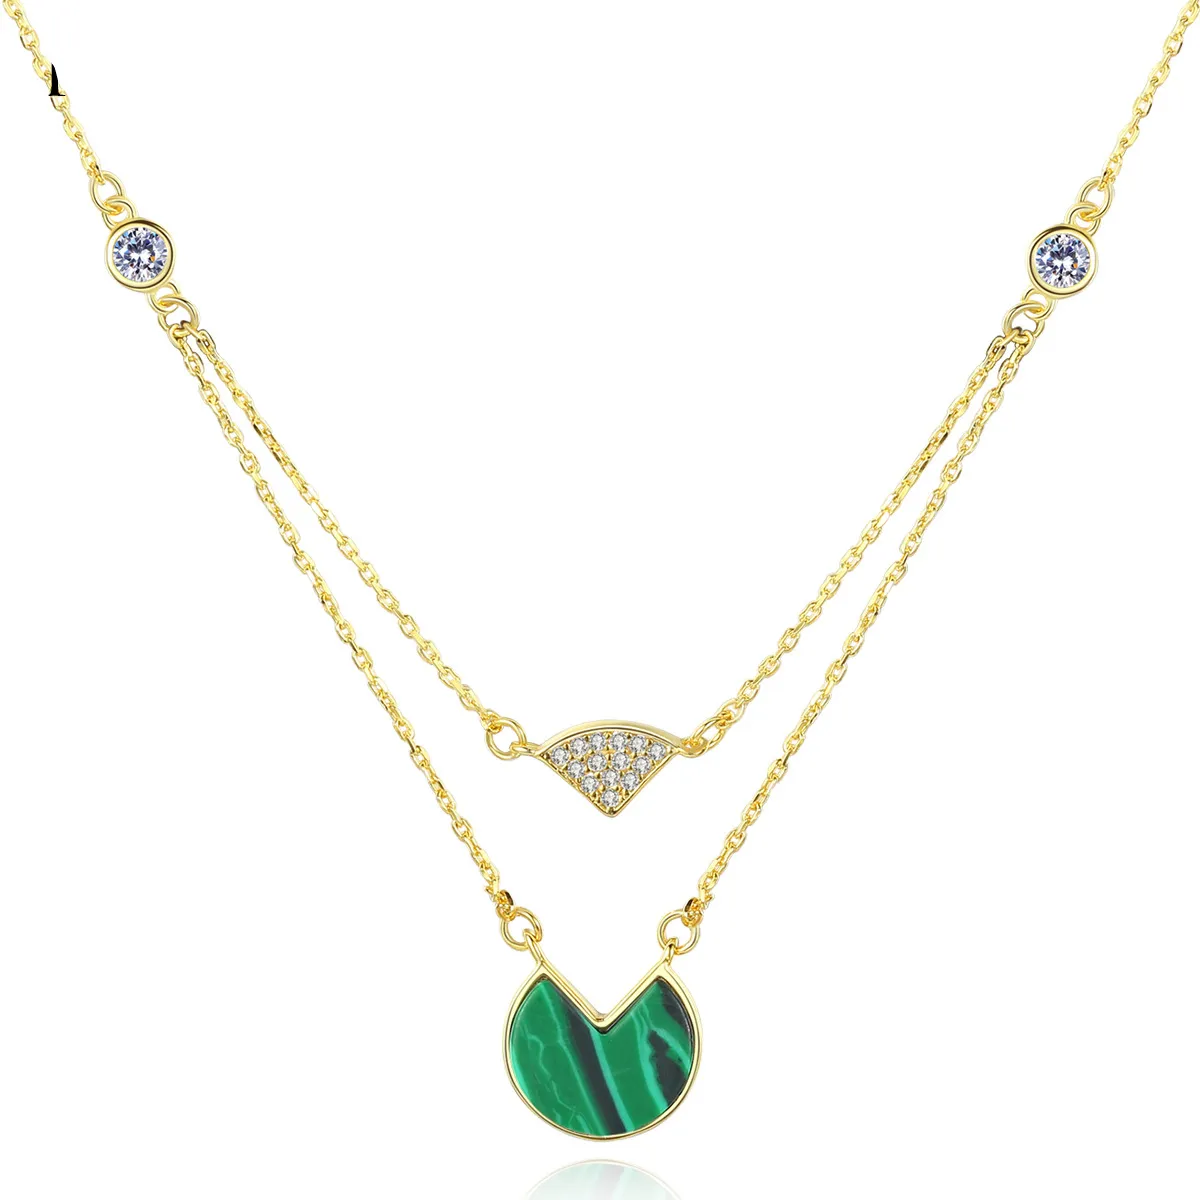 S925 Silver Pendant Necklace Micro Set Zircon Malachite High end Necklace Fashion Women Collar Chain Wedding Party Jewelry Valentine's Day Mother's Day Gift SPC